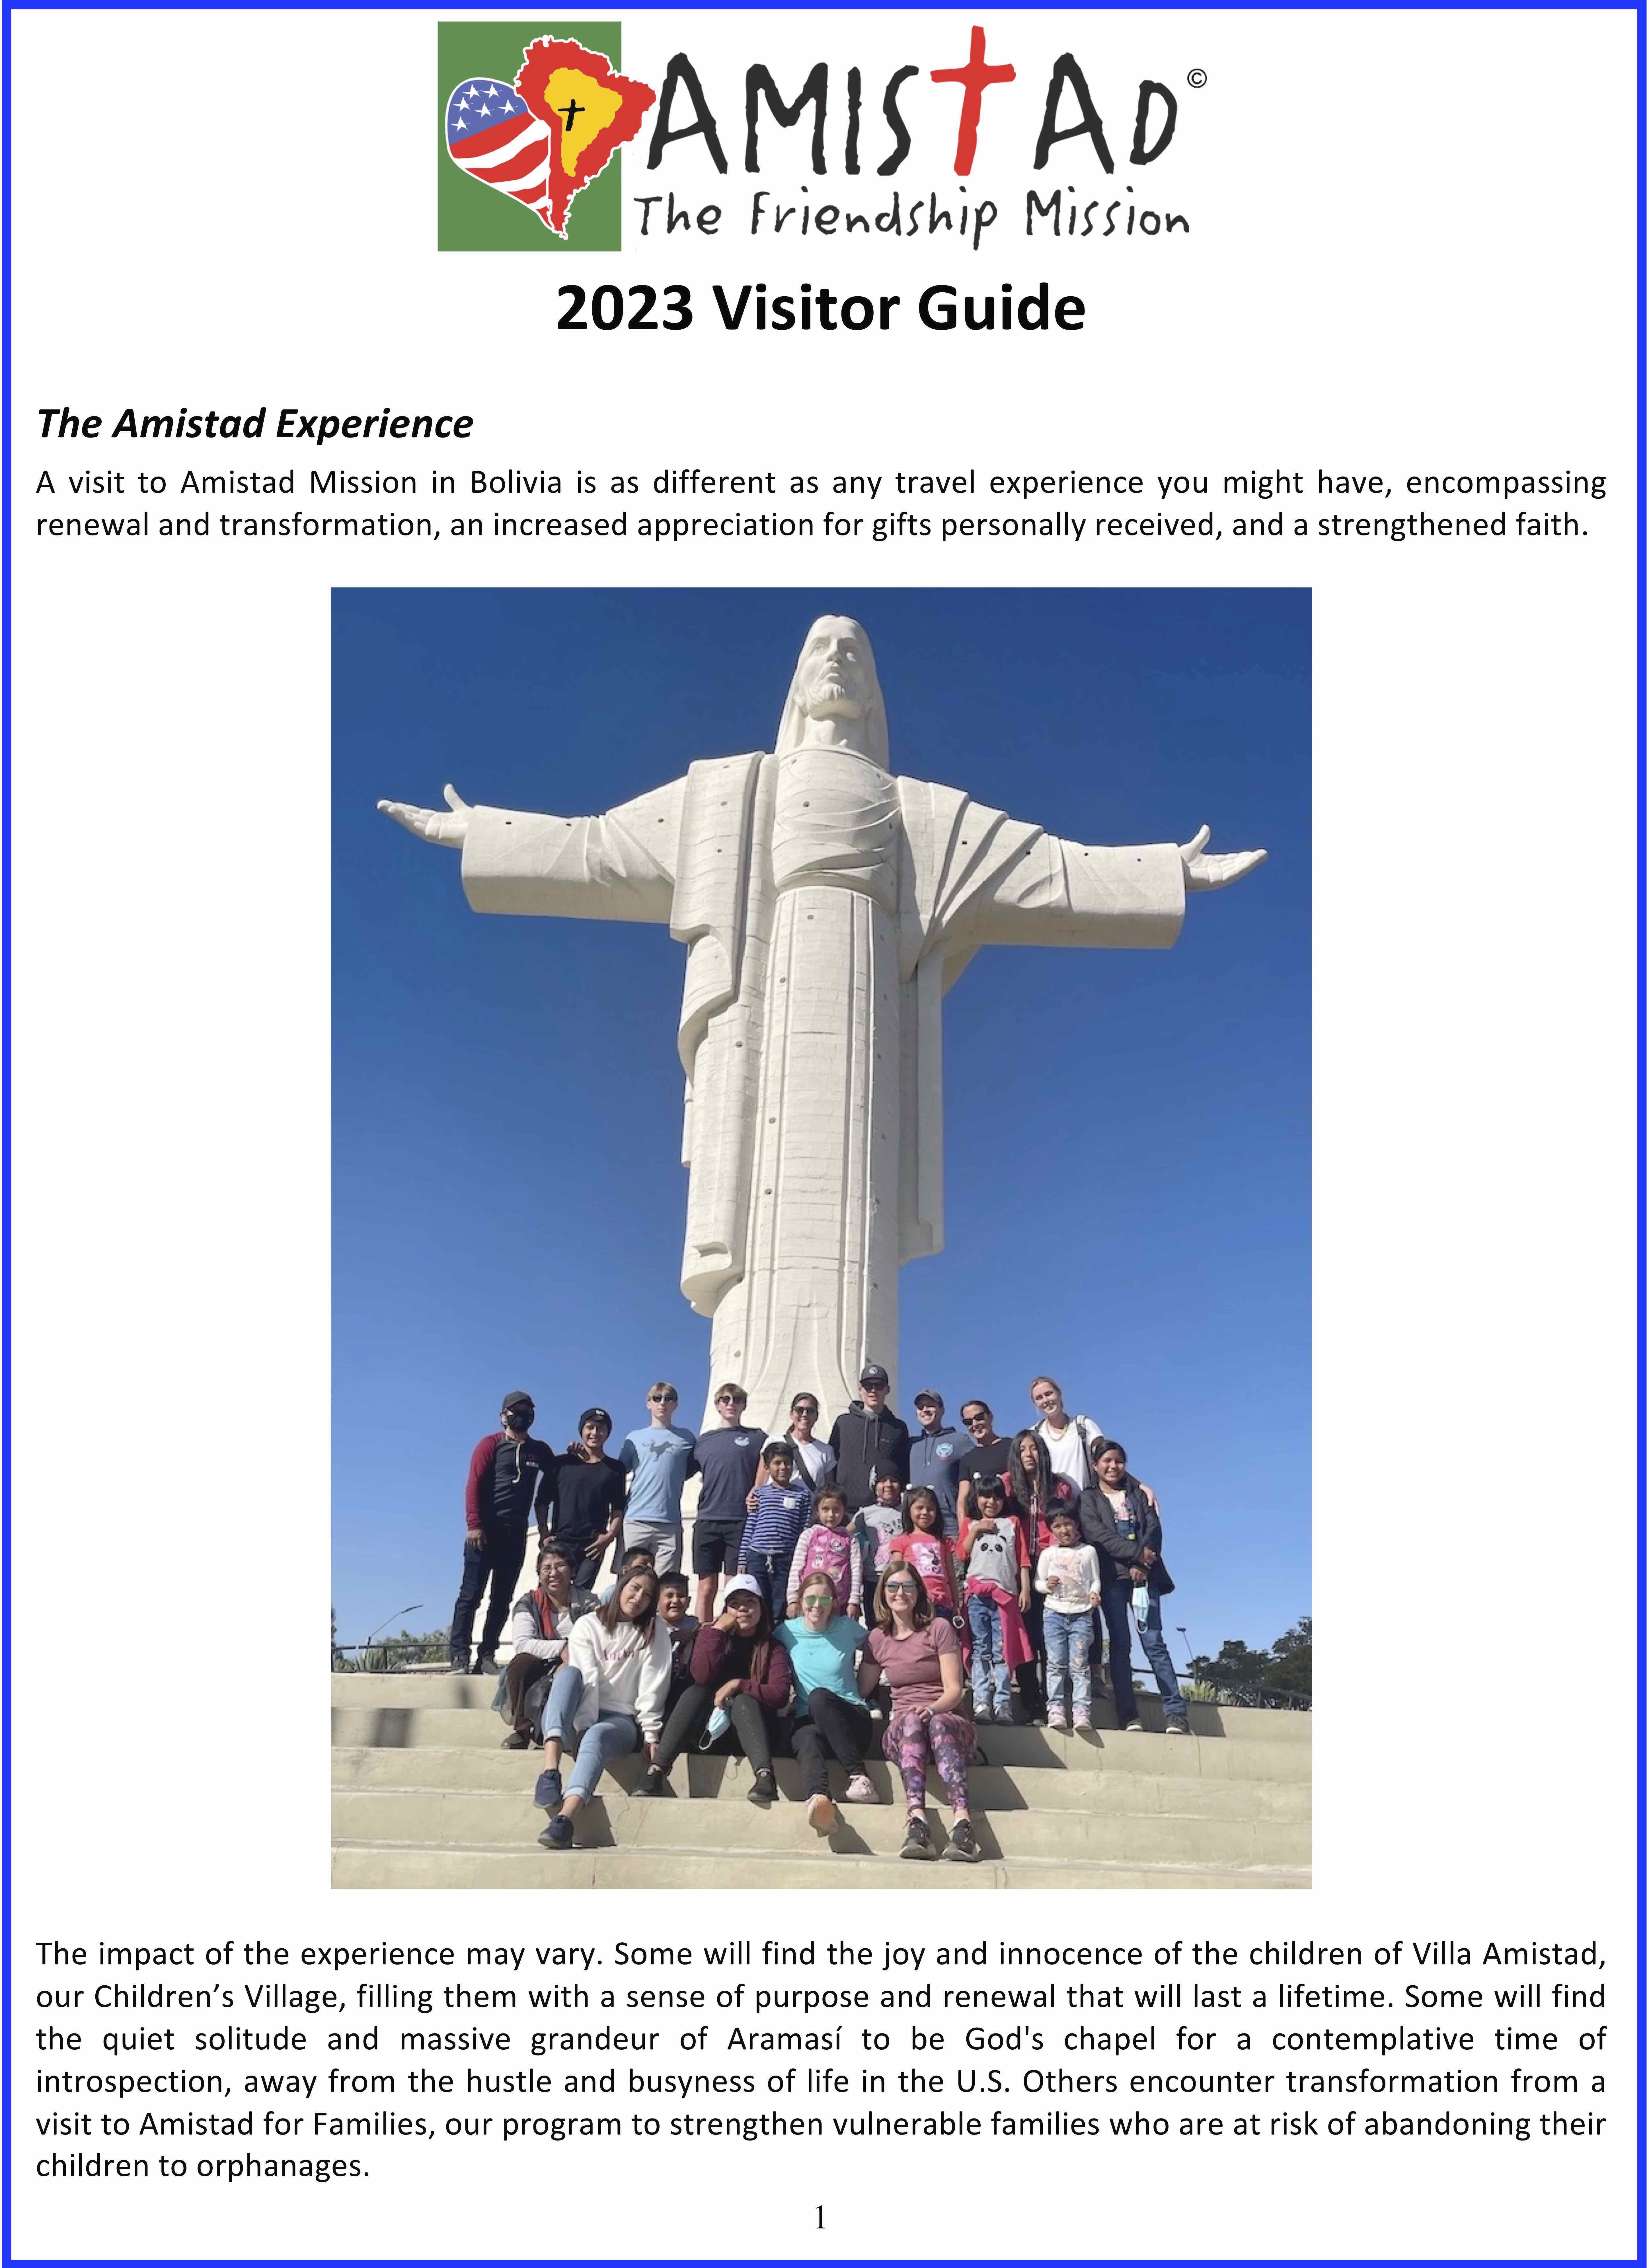 amistad-mission-visitor-guide-2023_228